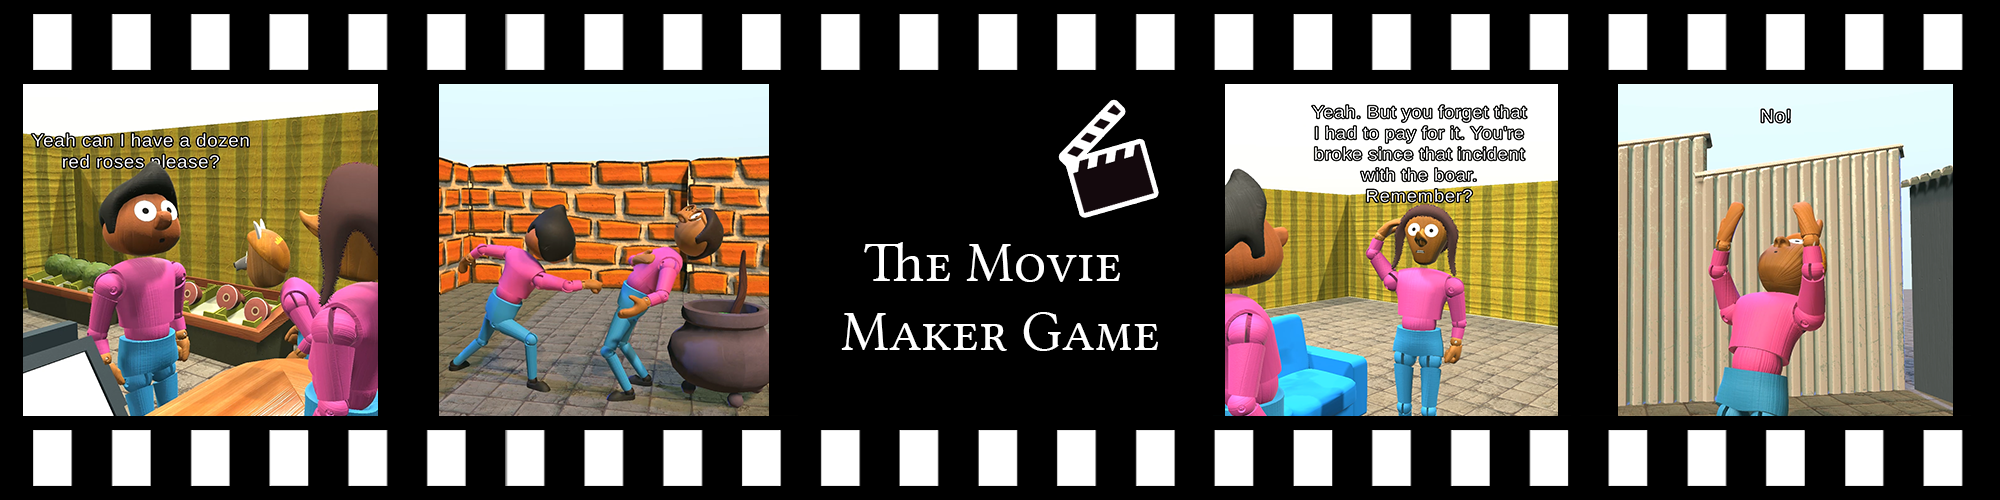 The Movie Maker Game